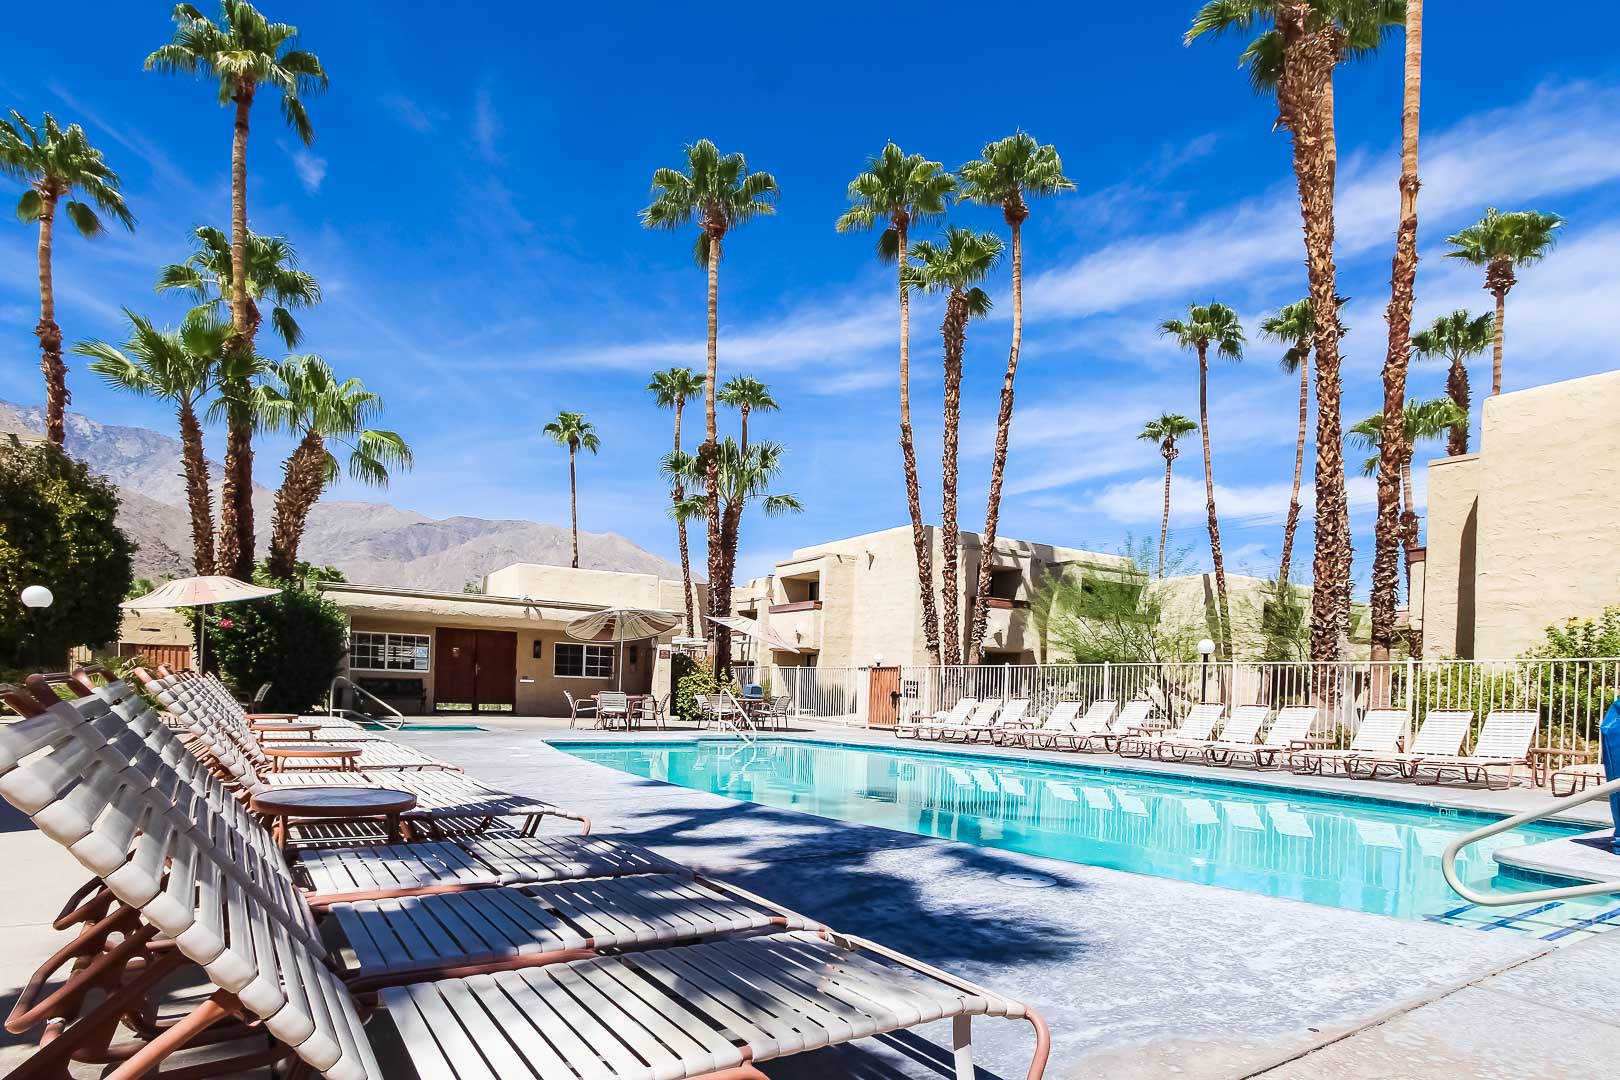 Beautiful skies and an outdoor swimming pool at VRI's Desert Vacation Villas in Palm Springs California.